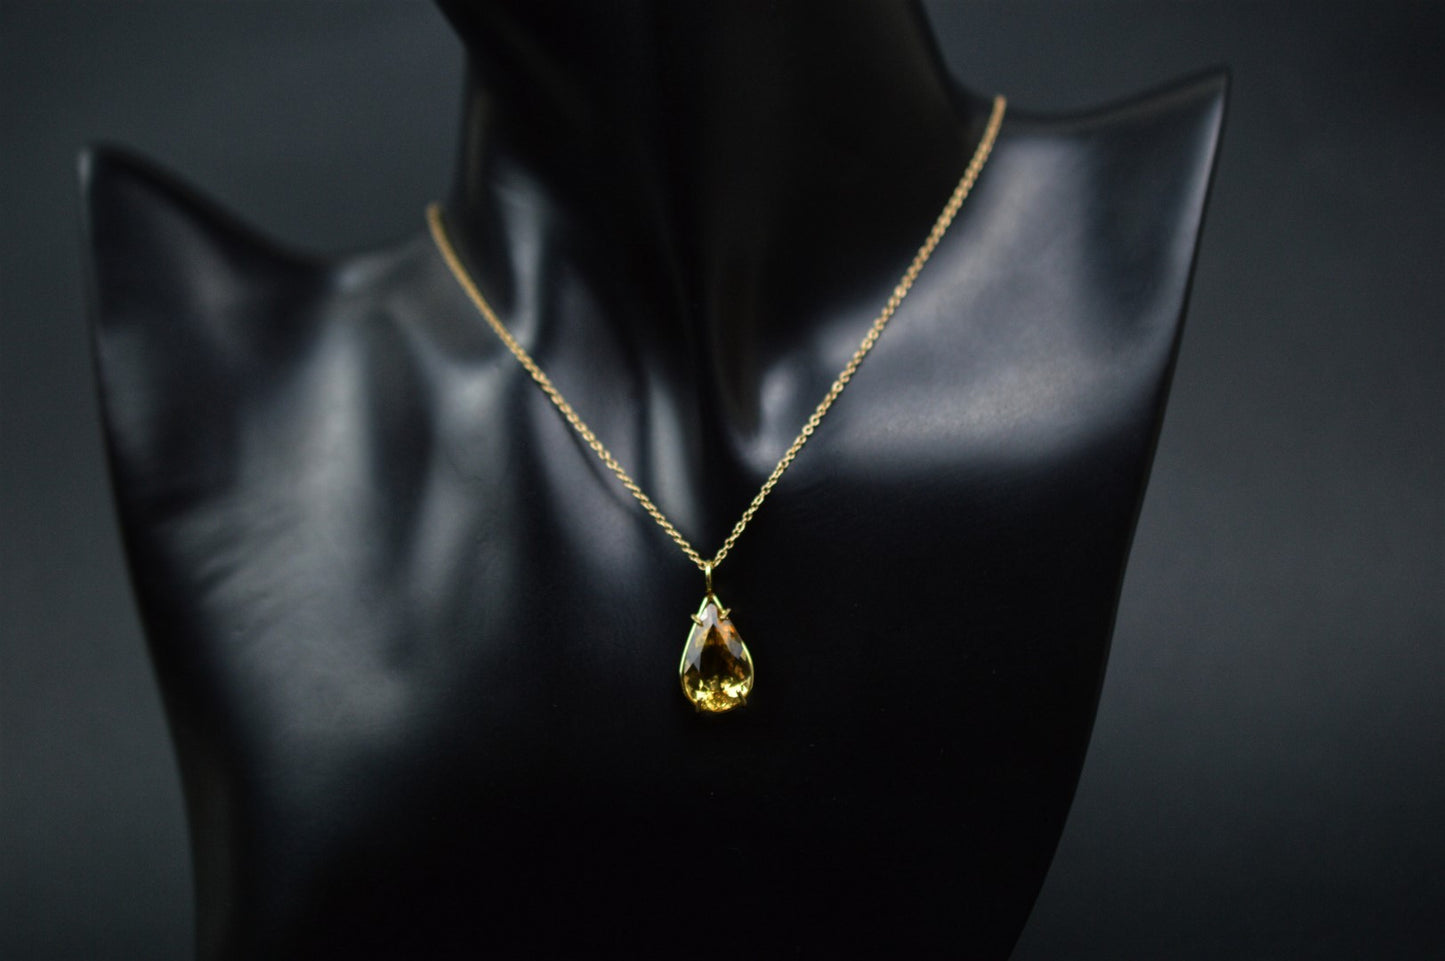 Beryl and gold pendant necklace